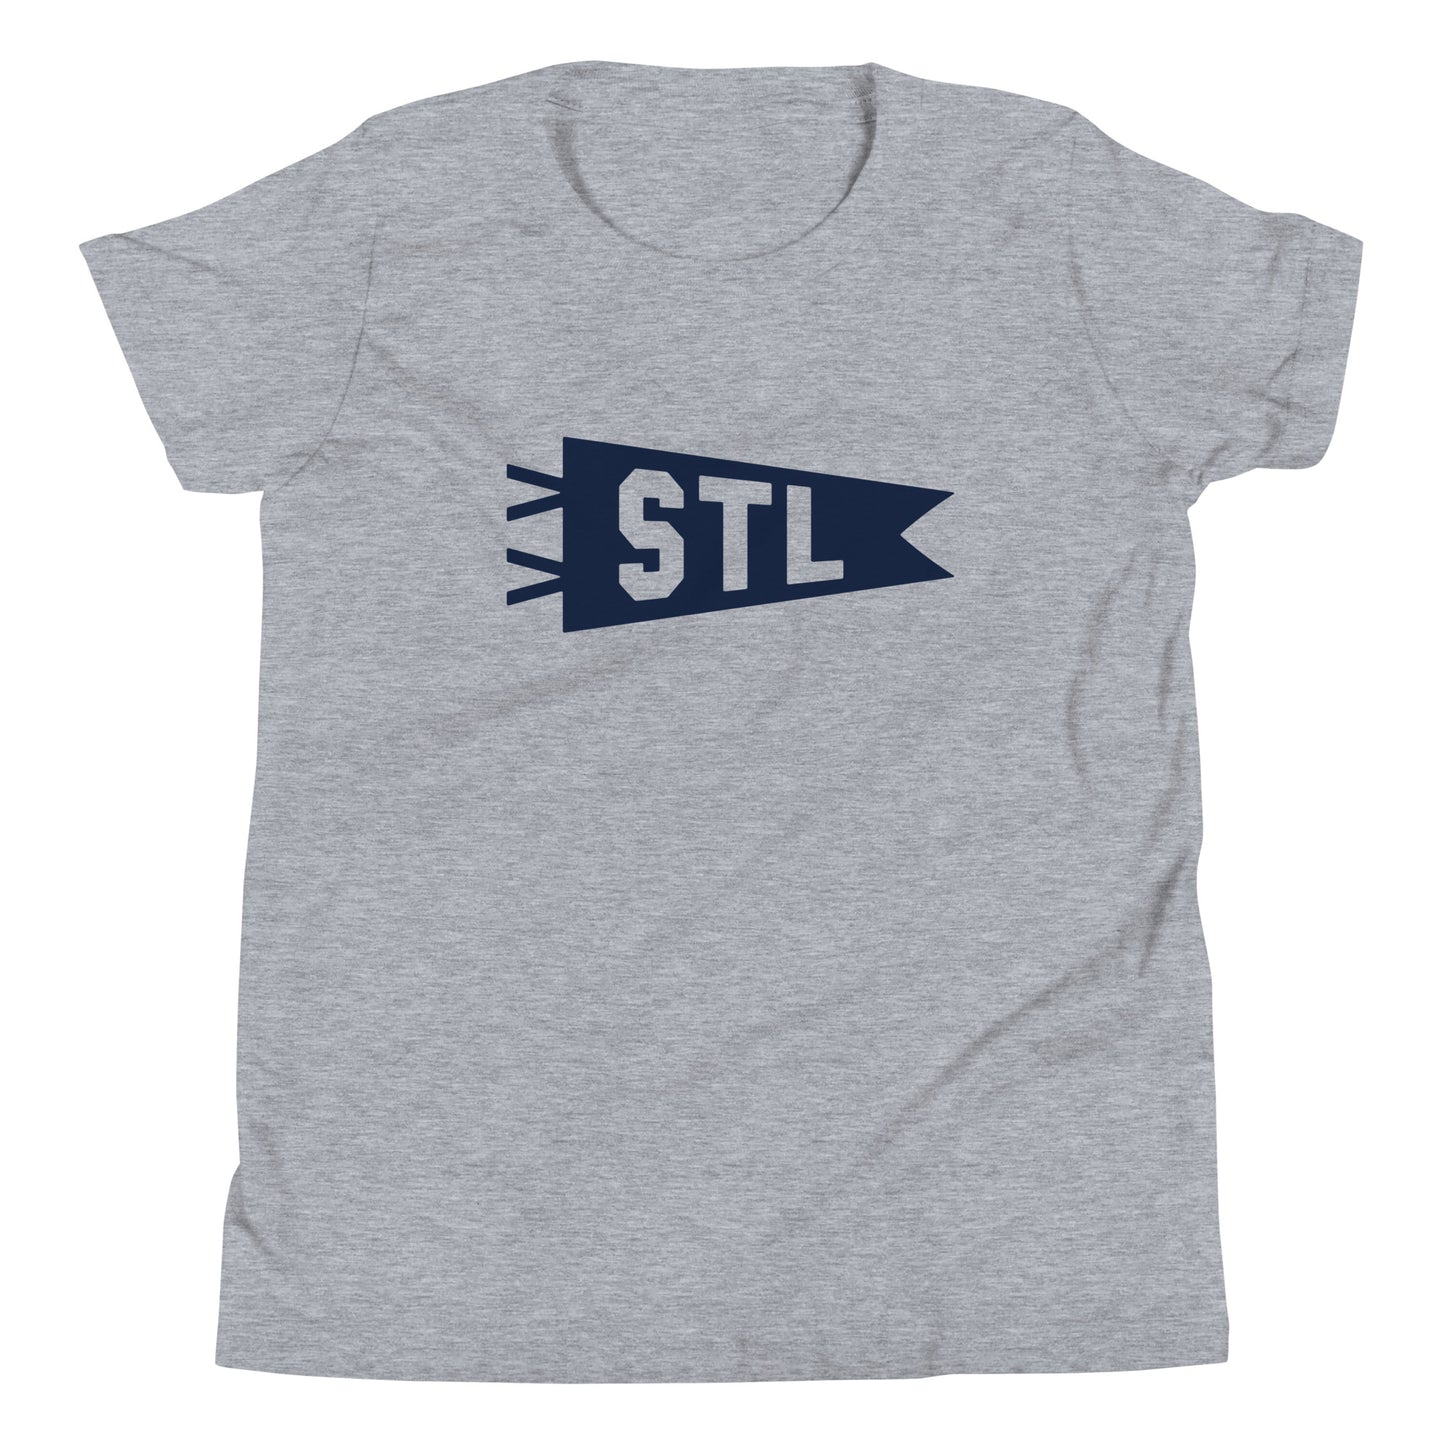 Kid's Airport Code Tee - Navy Blue Graphic • STL St. Louis • YHM Designs - Image 01